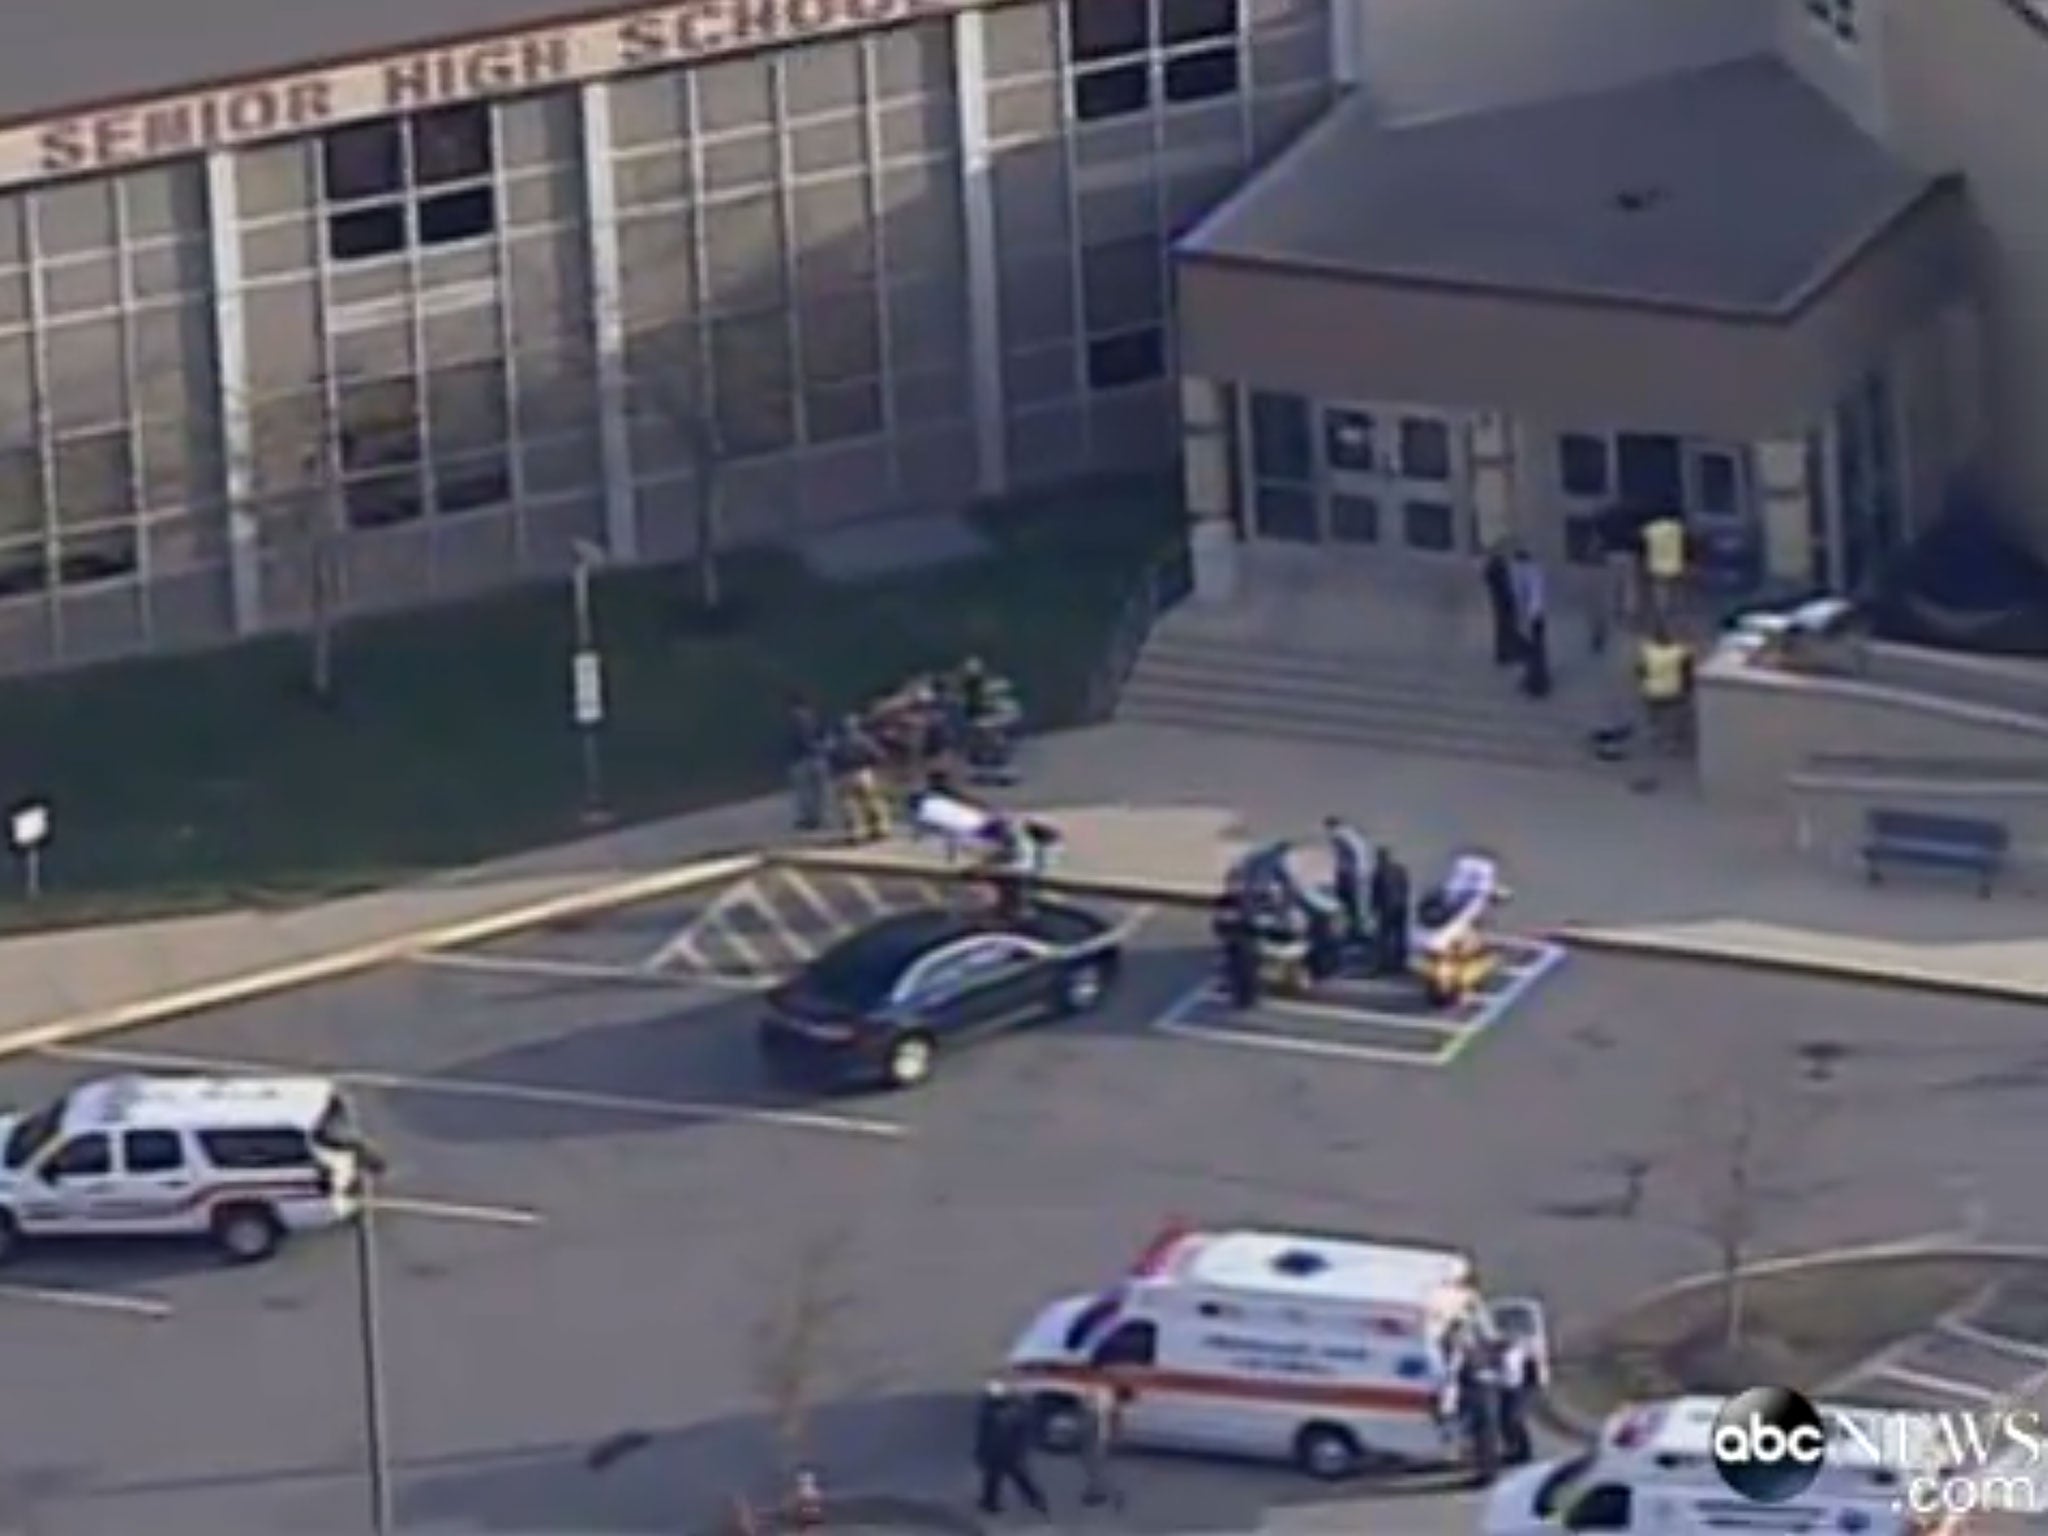 Police said 20 students were injured in the attack outside Franklin Regional High School in Murrysville, near Pittsburgh this morning